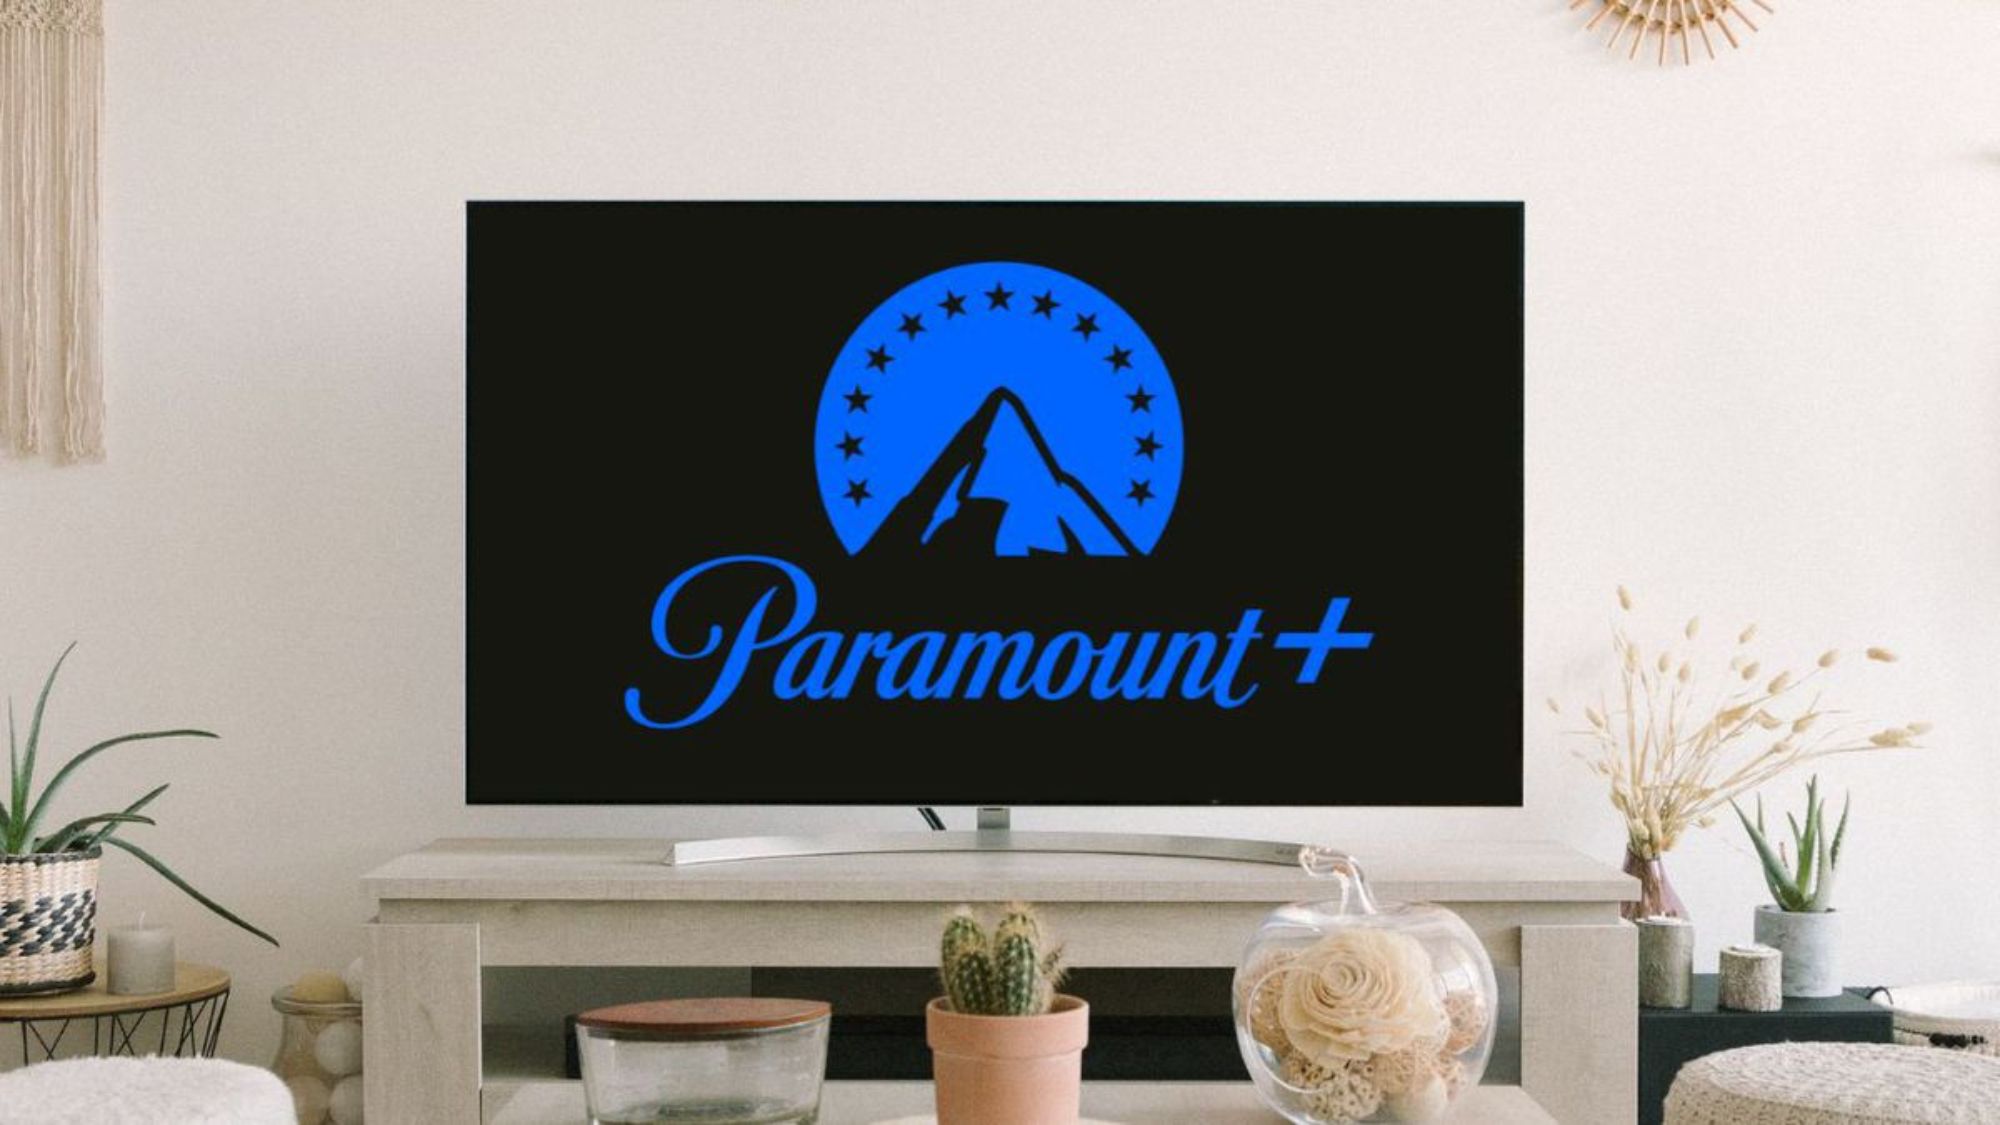 Paramount Plus Coupon Codes, Free Trial, Deals, Plans and More – TVLine